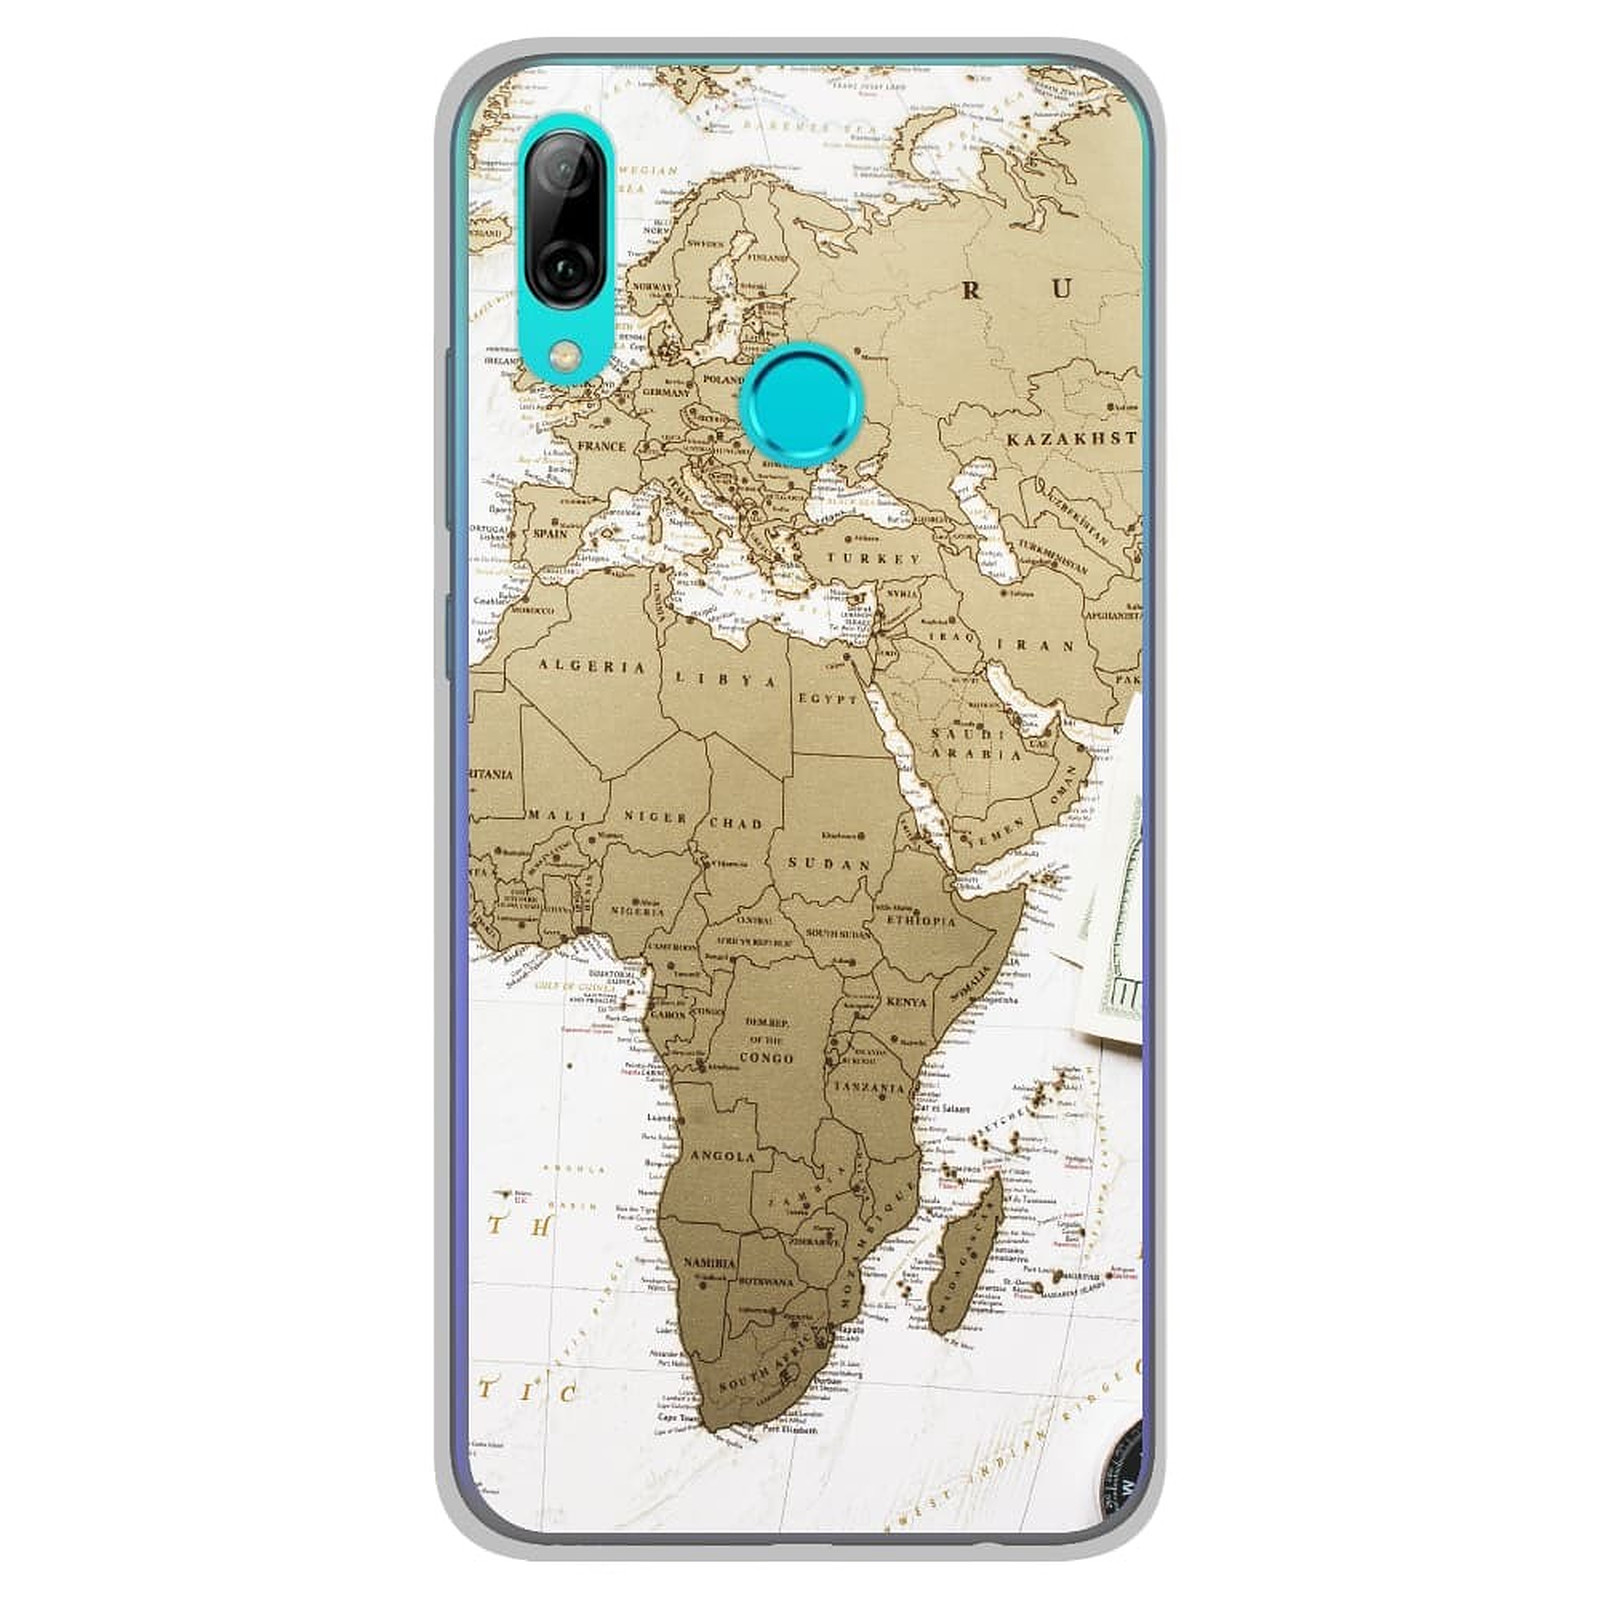 1001 Coques Coque silicone gel Huawei P Smart 2019 motif Map Europe Afrique - Coque telephone 1001Coques